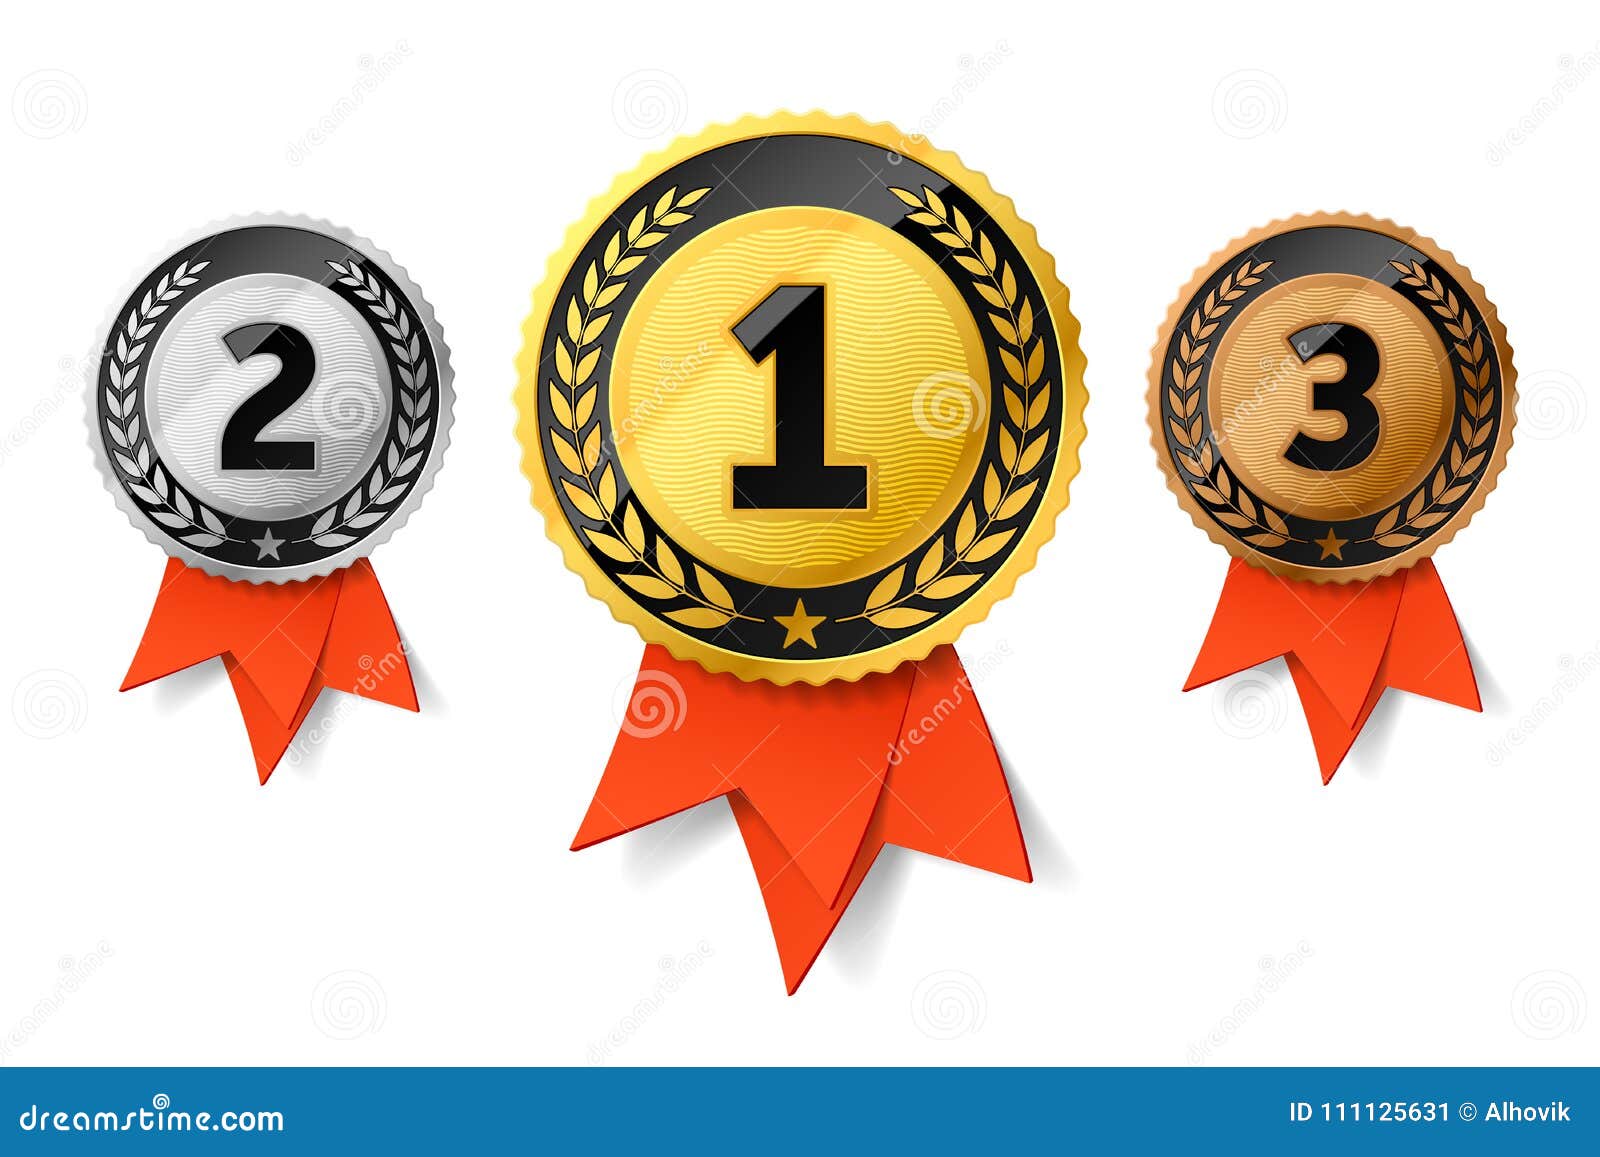 champions-gold-silver-and-bronze-award-medals-vector-illustration